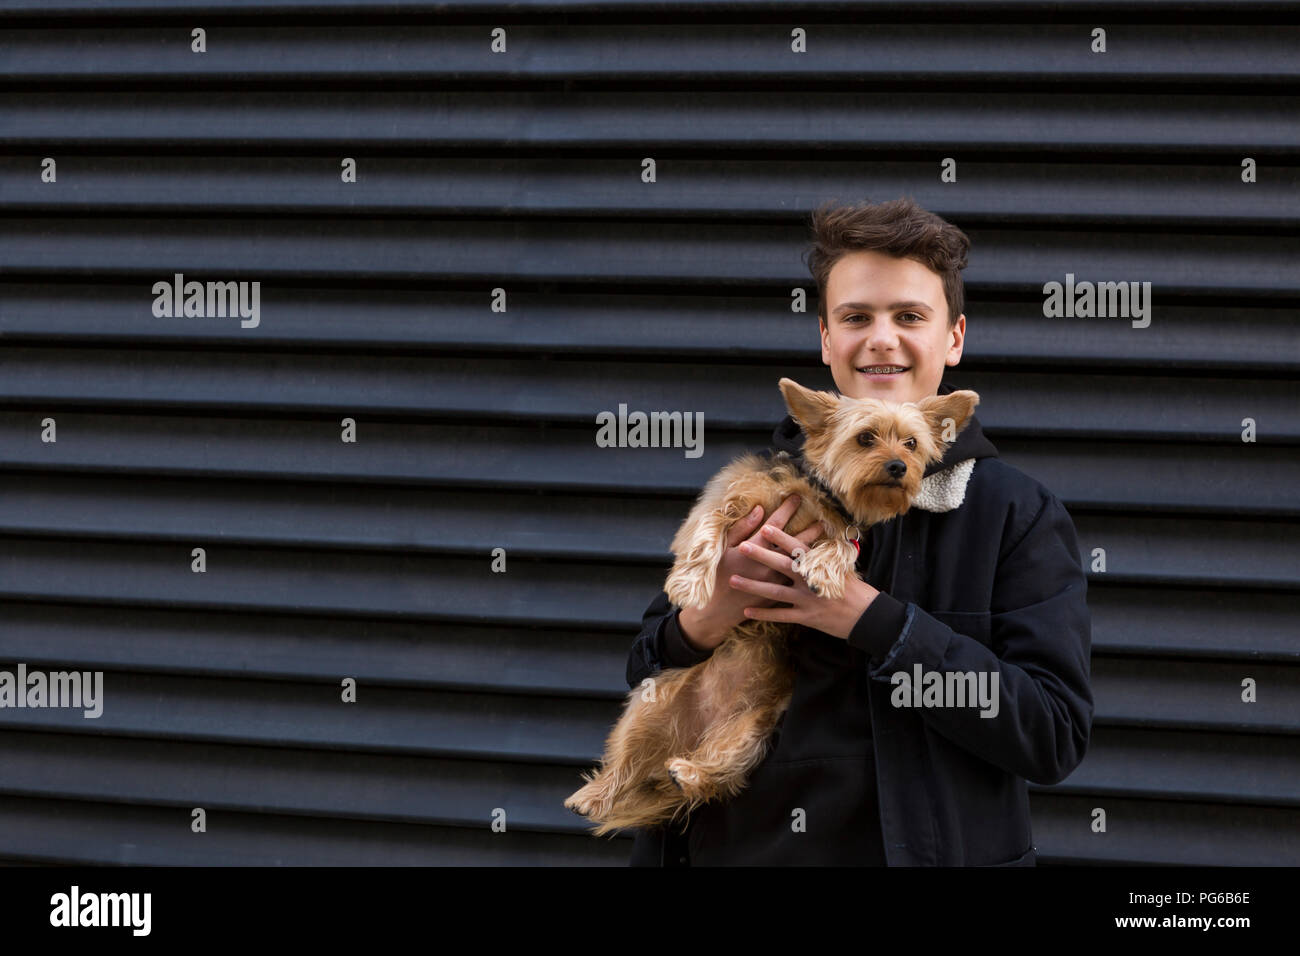 Portrait of smiling teenage boy with his dog against black background Stock Photo